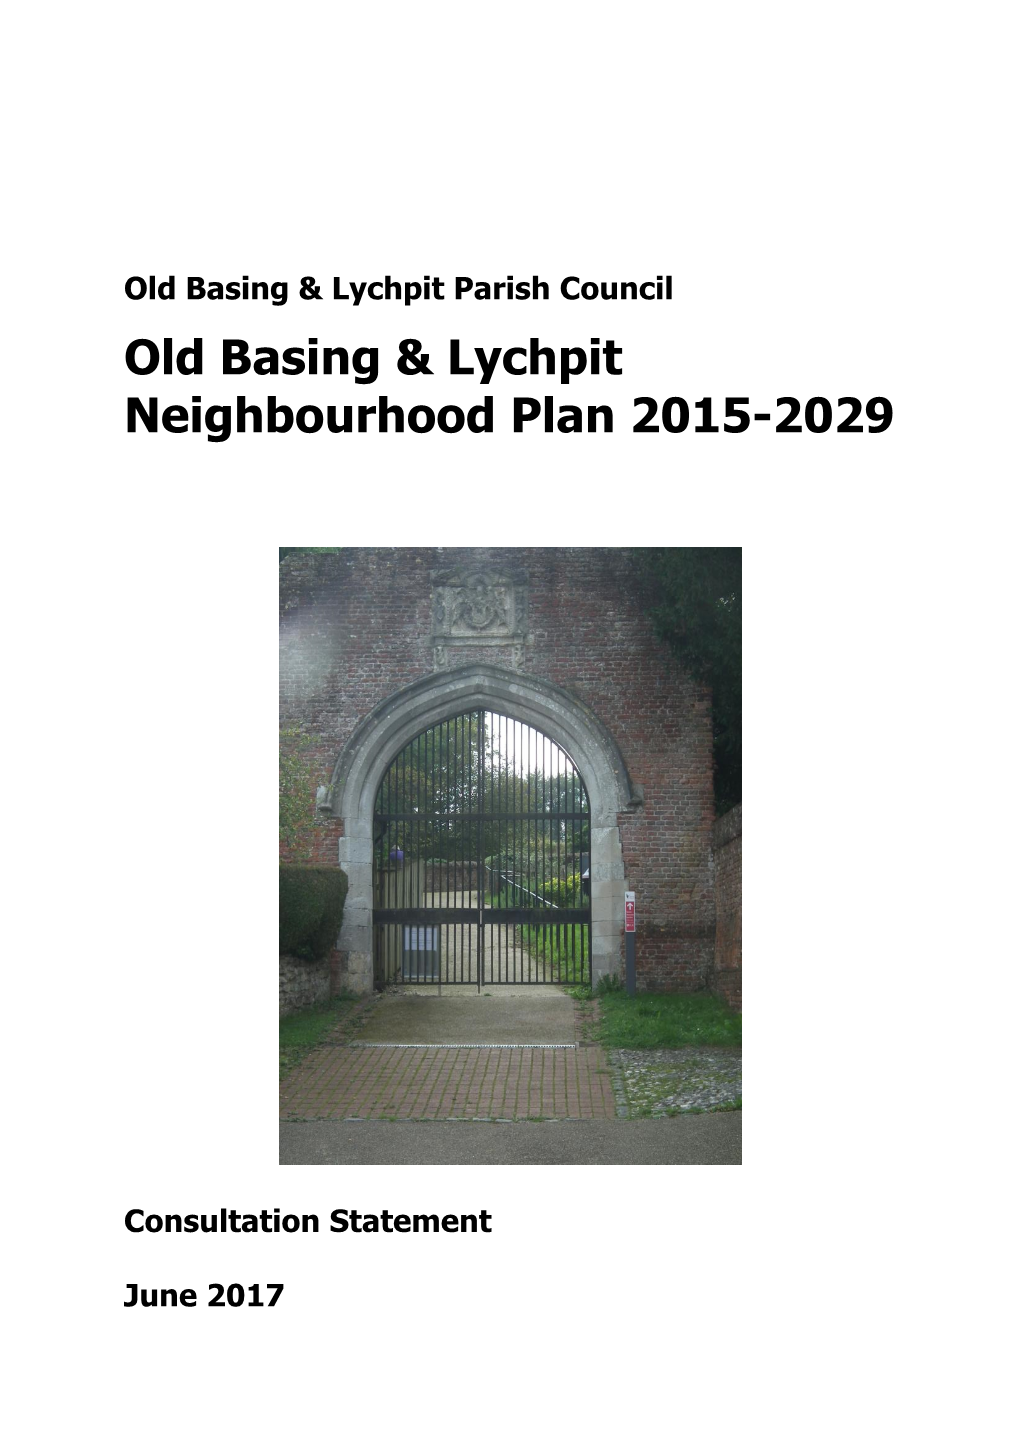 Old Basing and Lychpit Consultation Statement